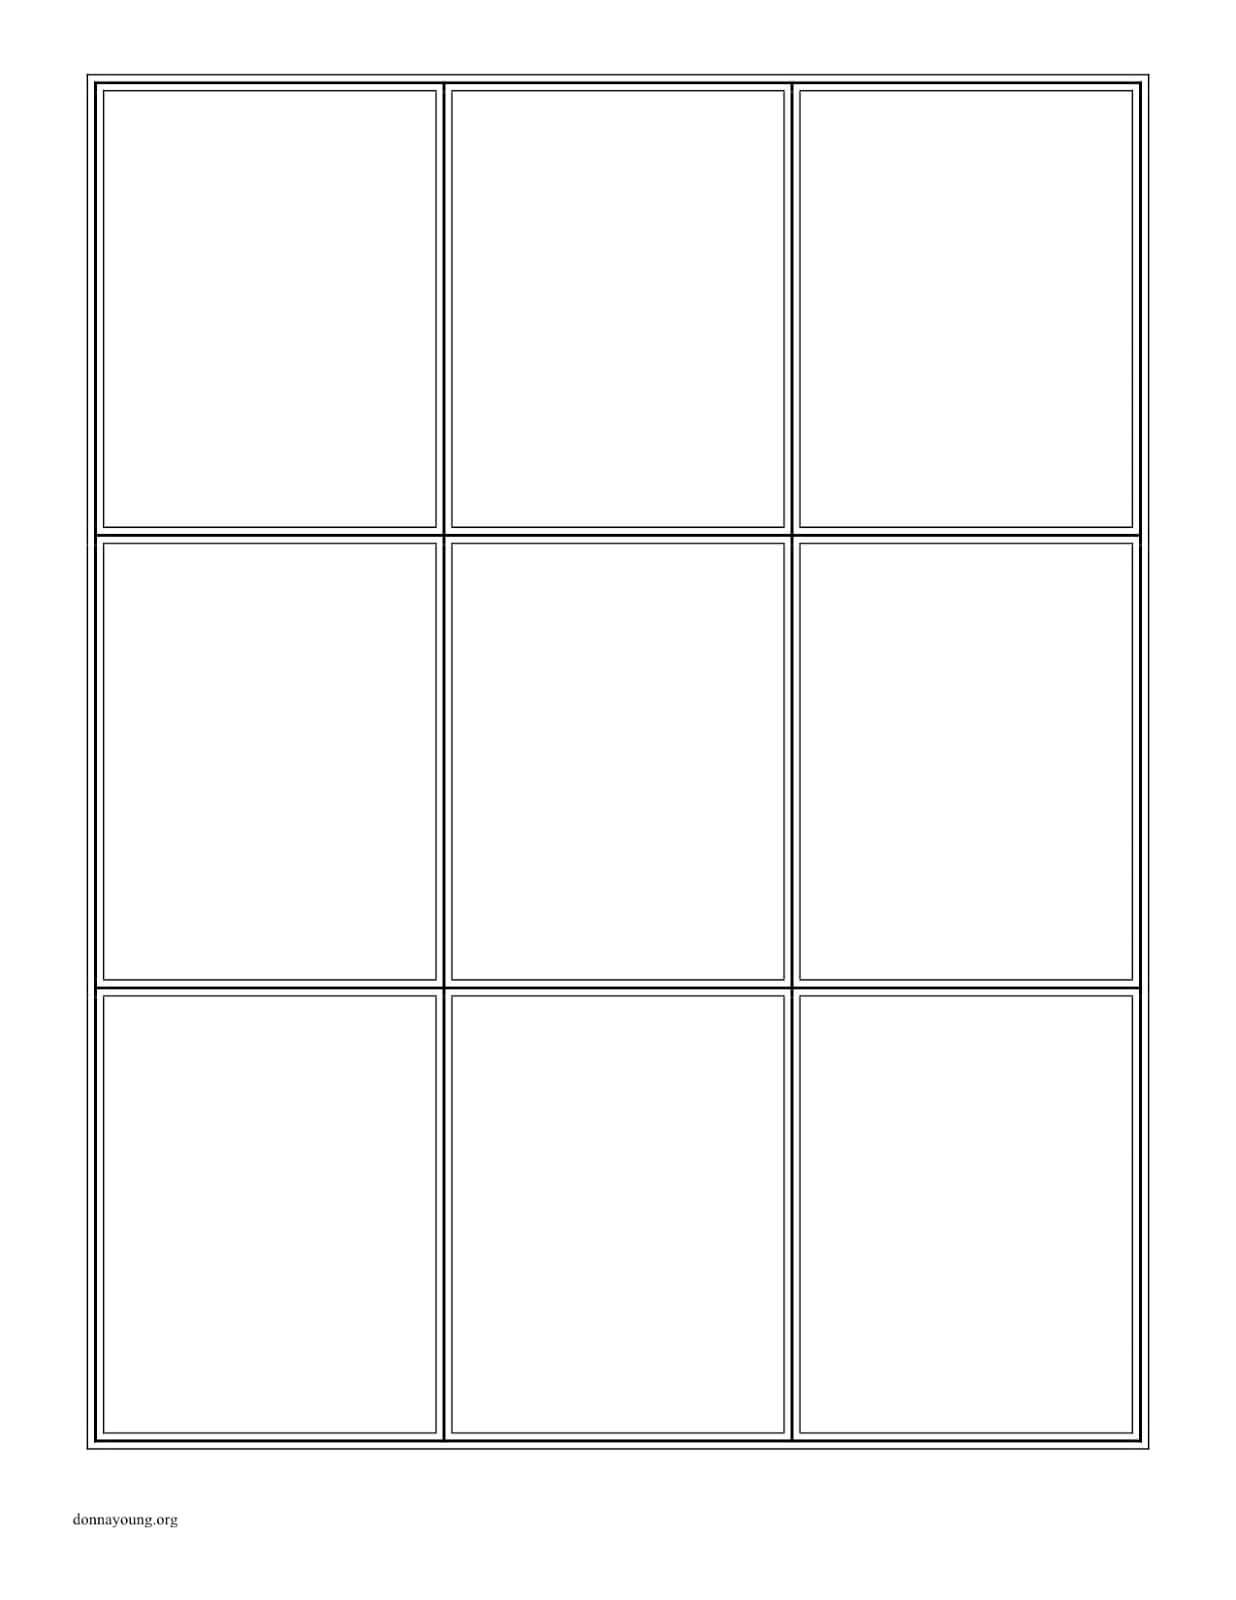 005 Free Trading Card Template Maker Ideas Board Game Blank Regarding Template For Game Cards